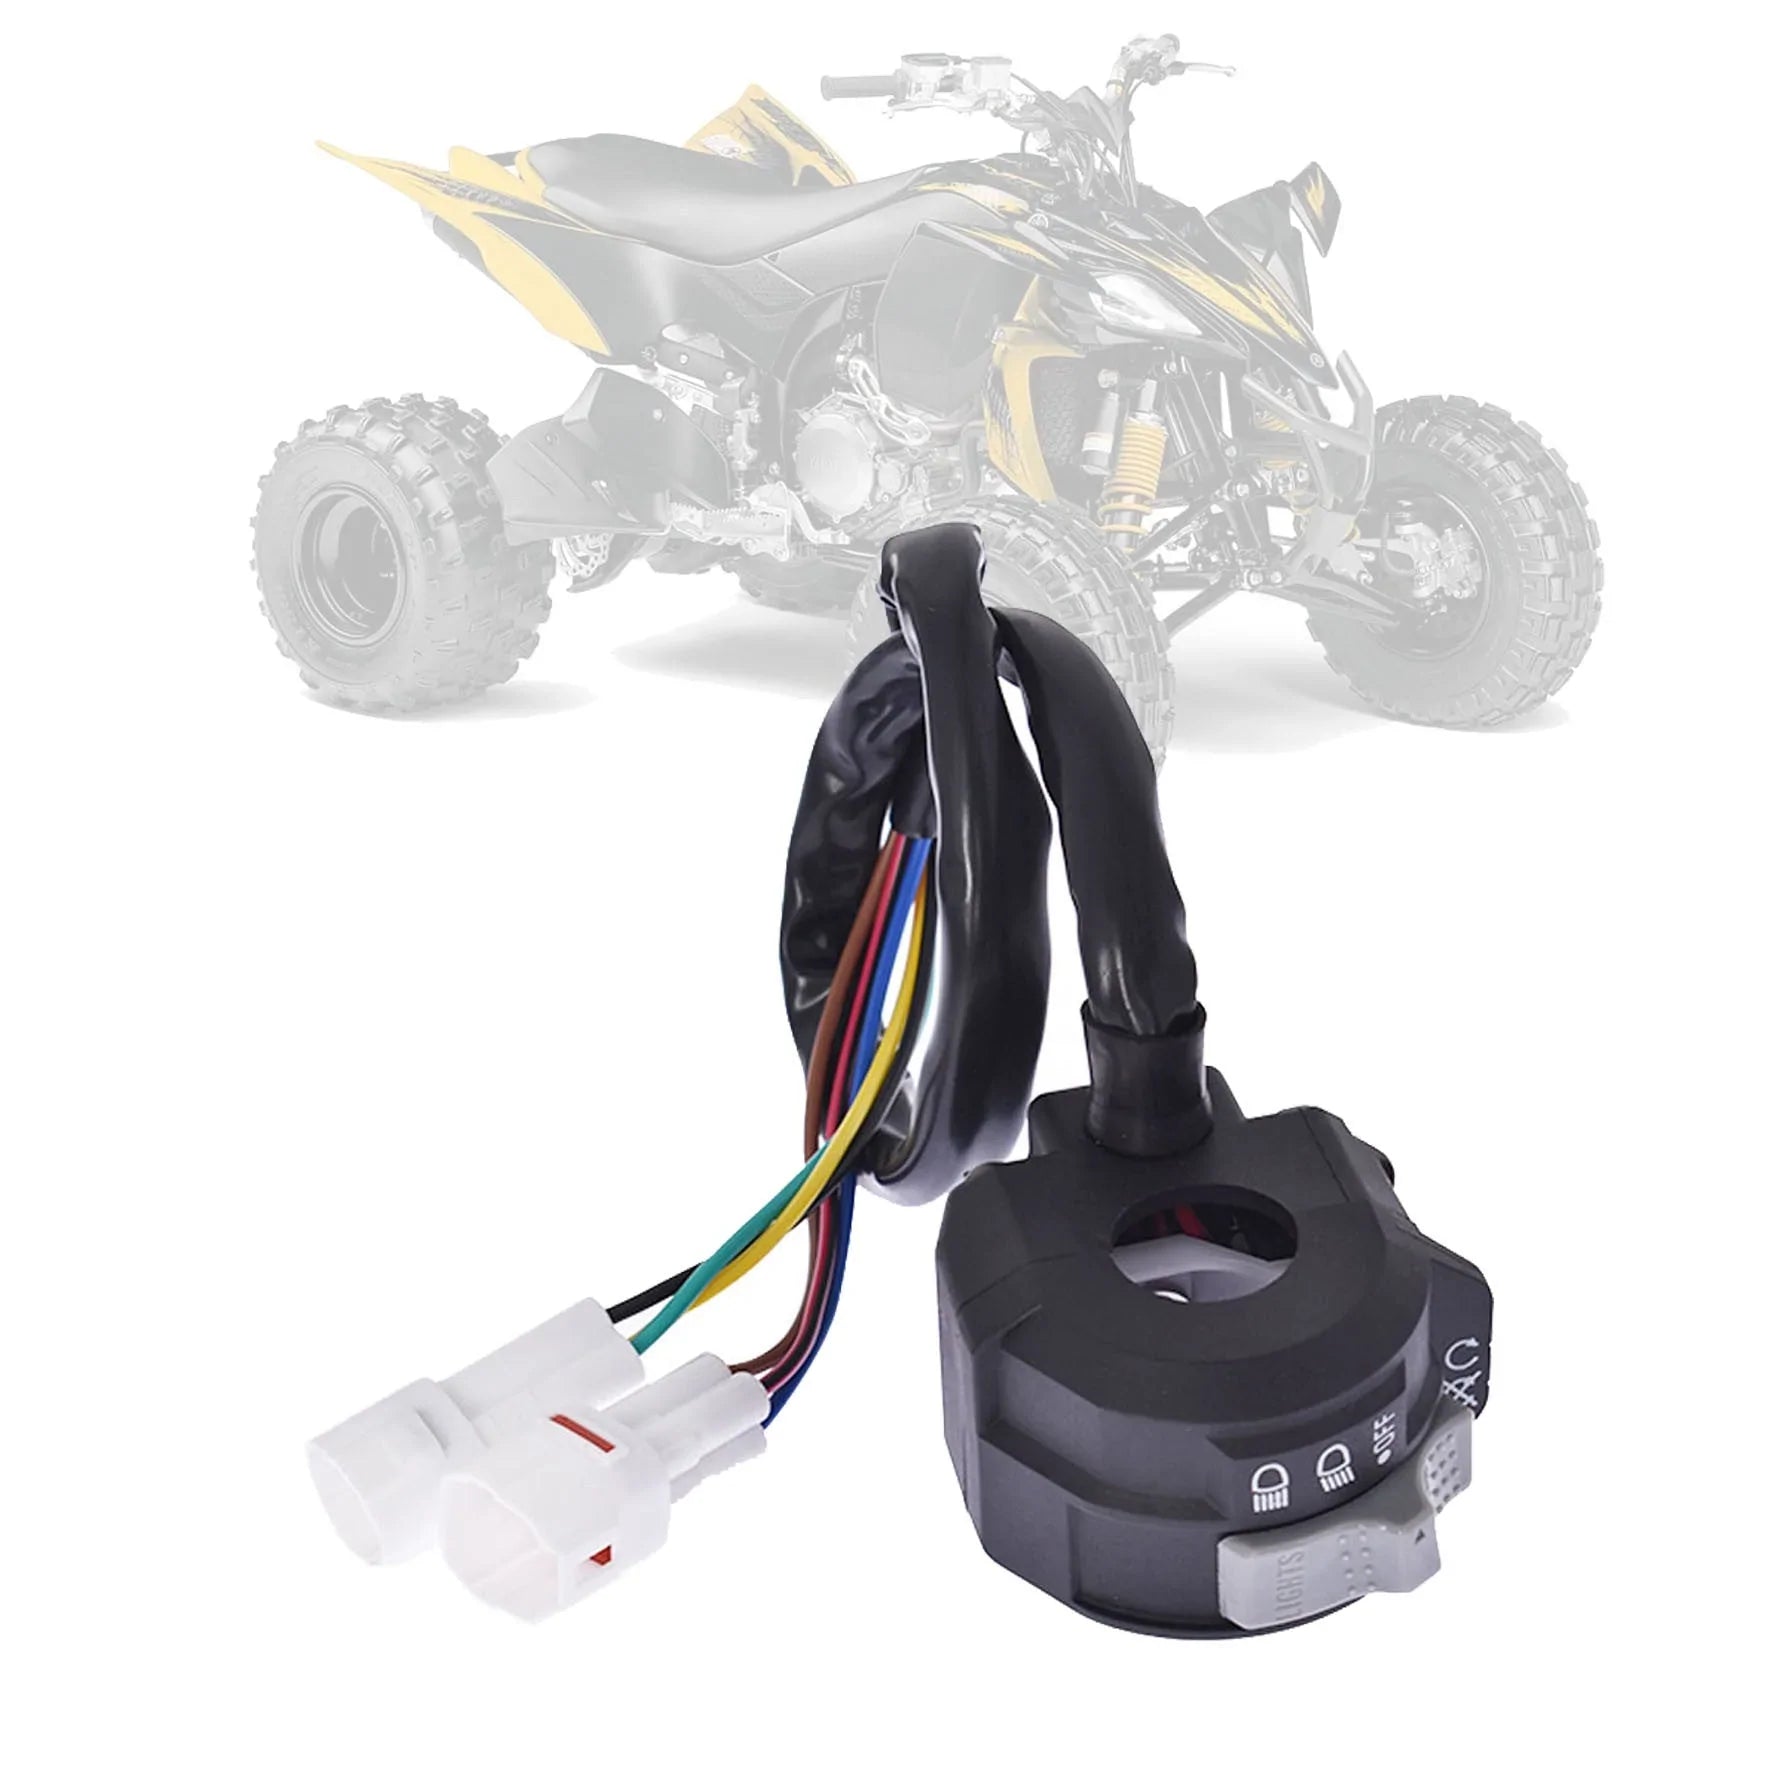 Switch On Off Run Start Stop Headlight 4KB-83973-21-00 Replacement for Yamaha YFZ450 Grizzly Raptor Raptor 250 125 LAB WORK MOTO